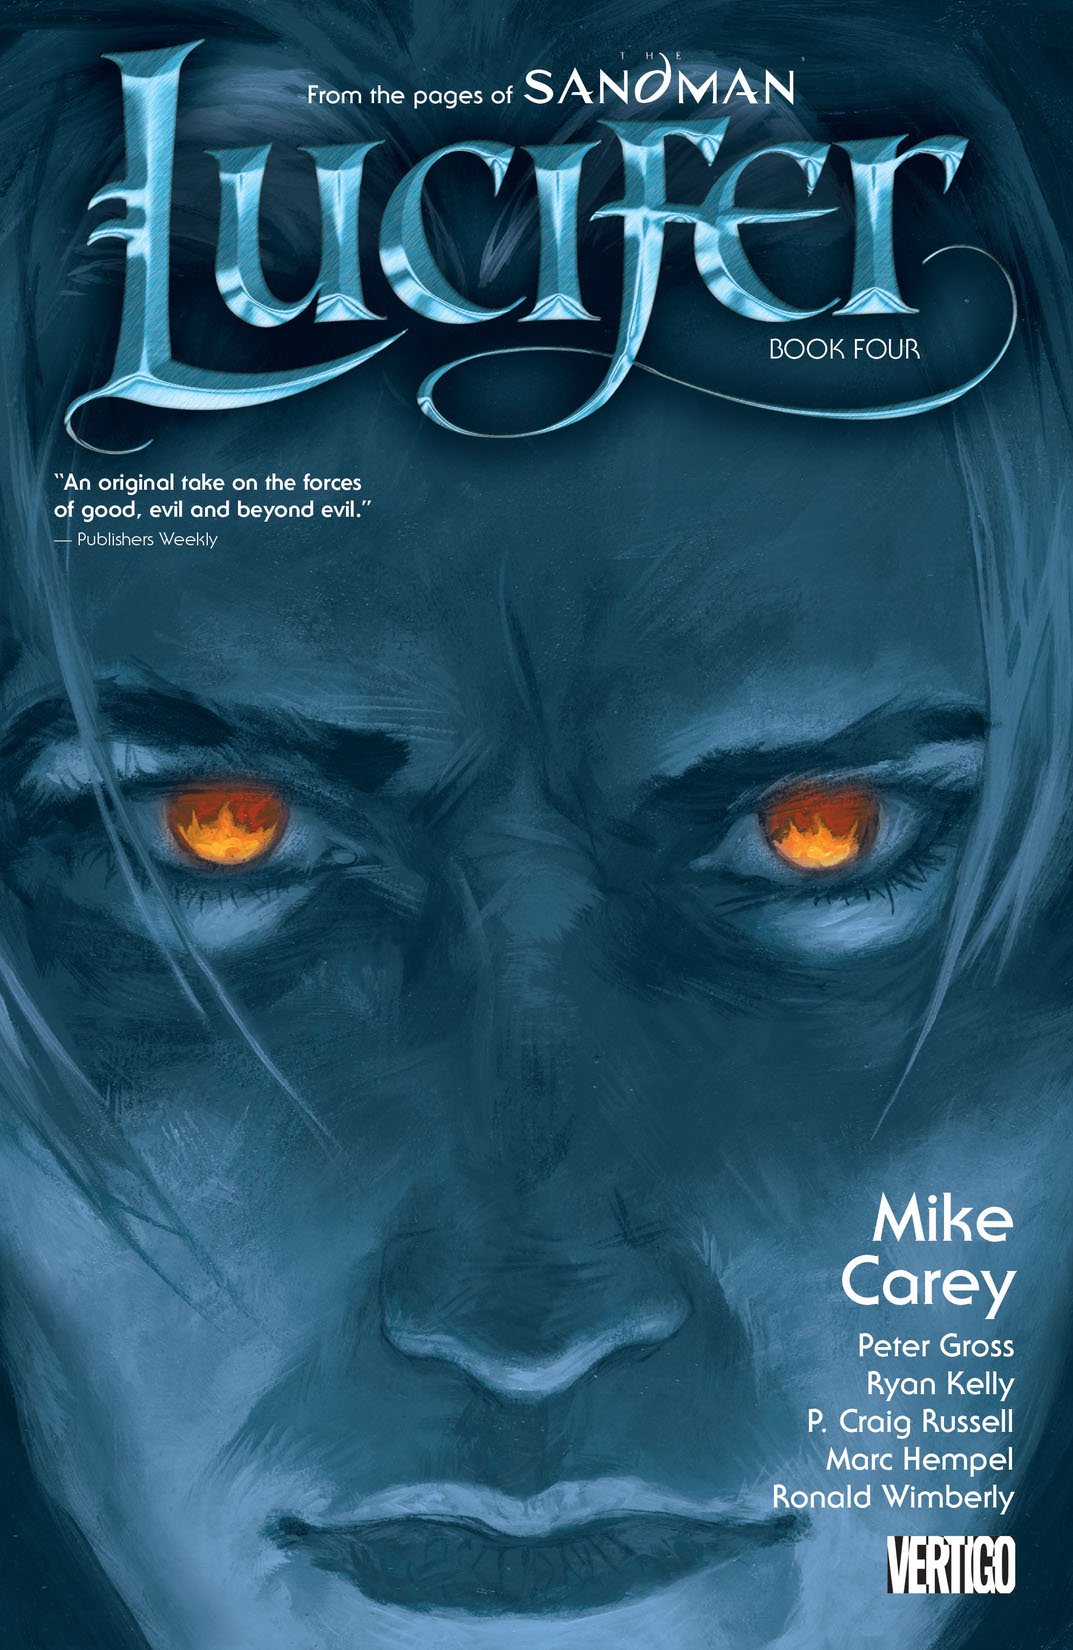 Lucifer Book Four preview images